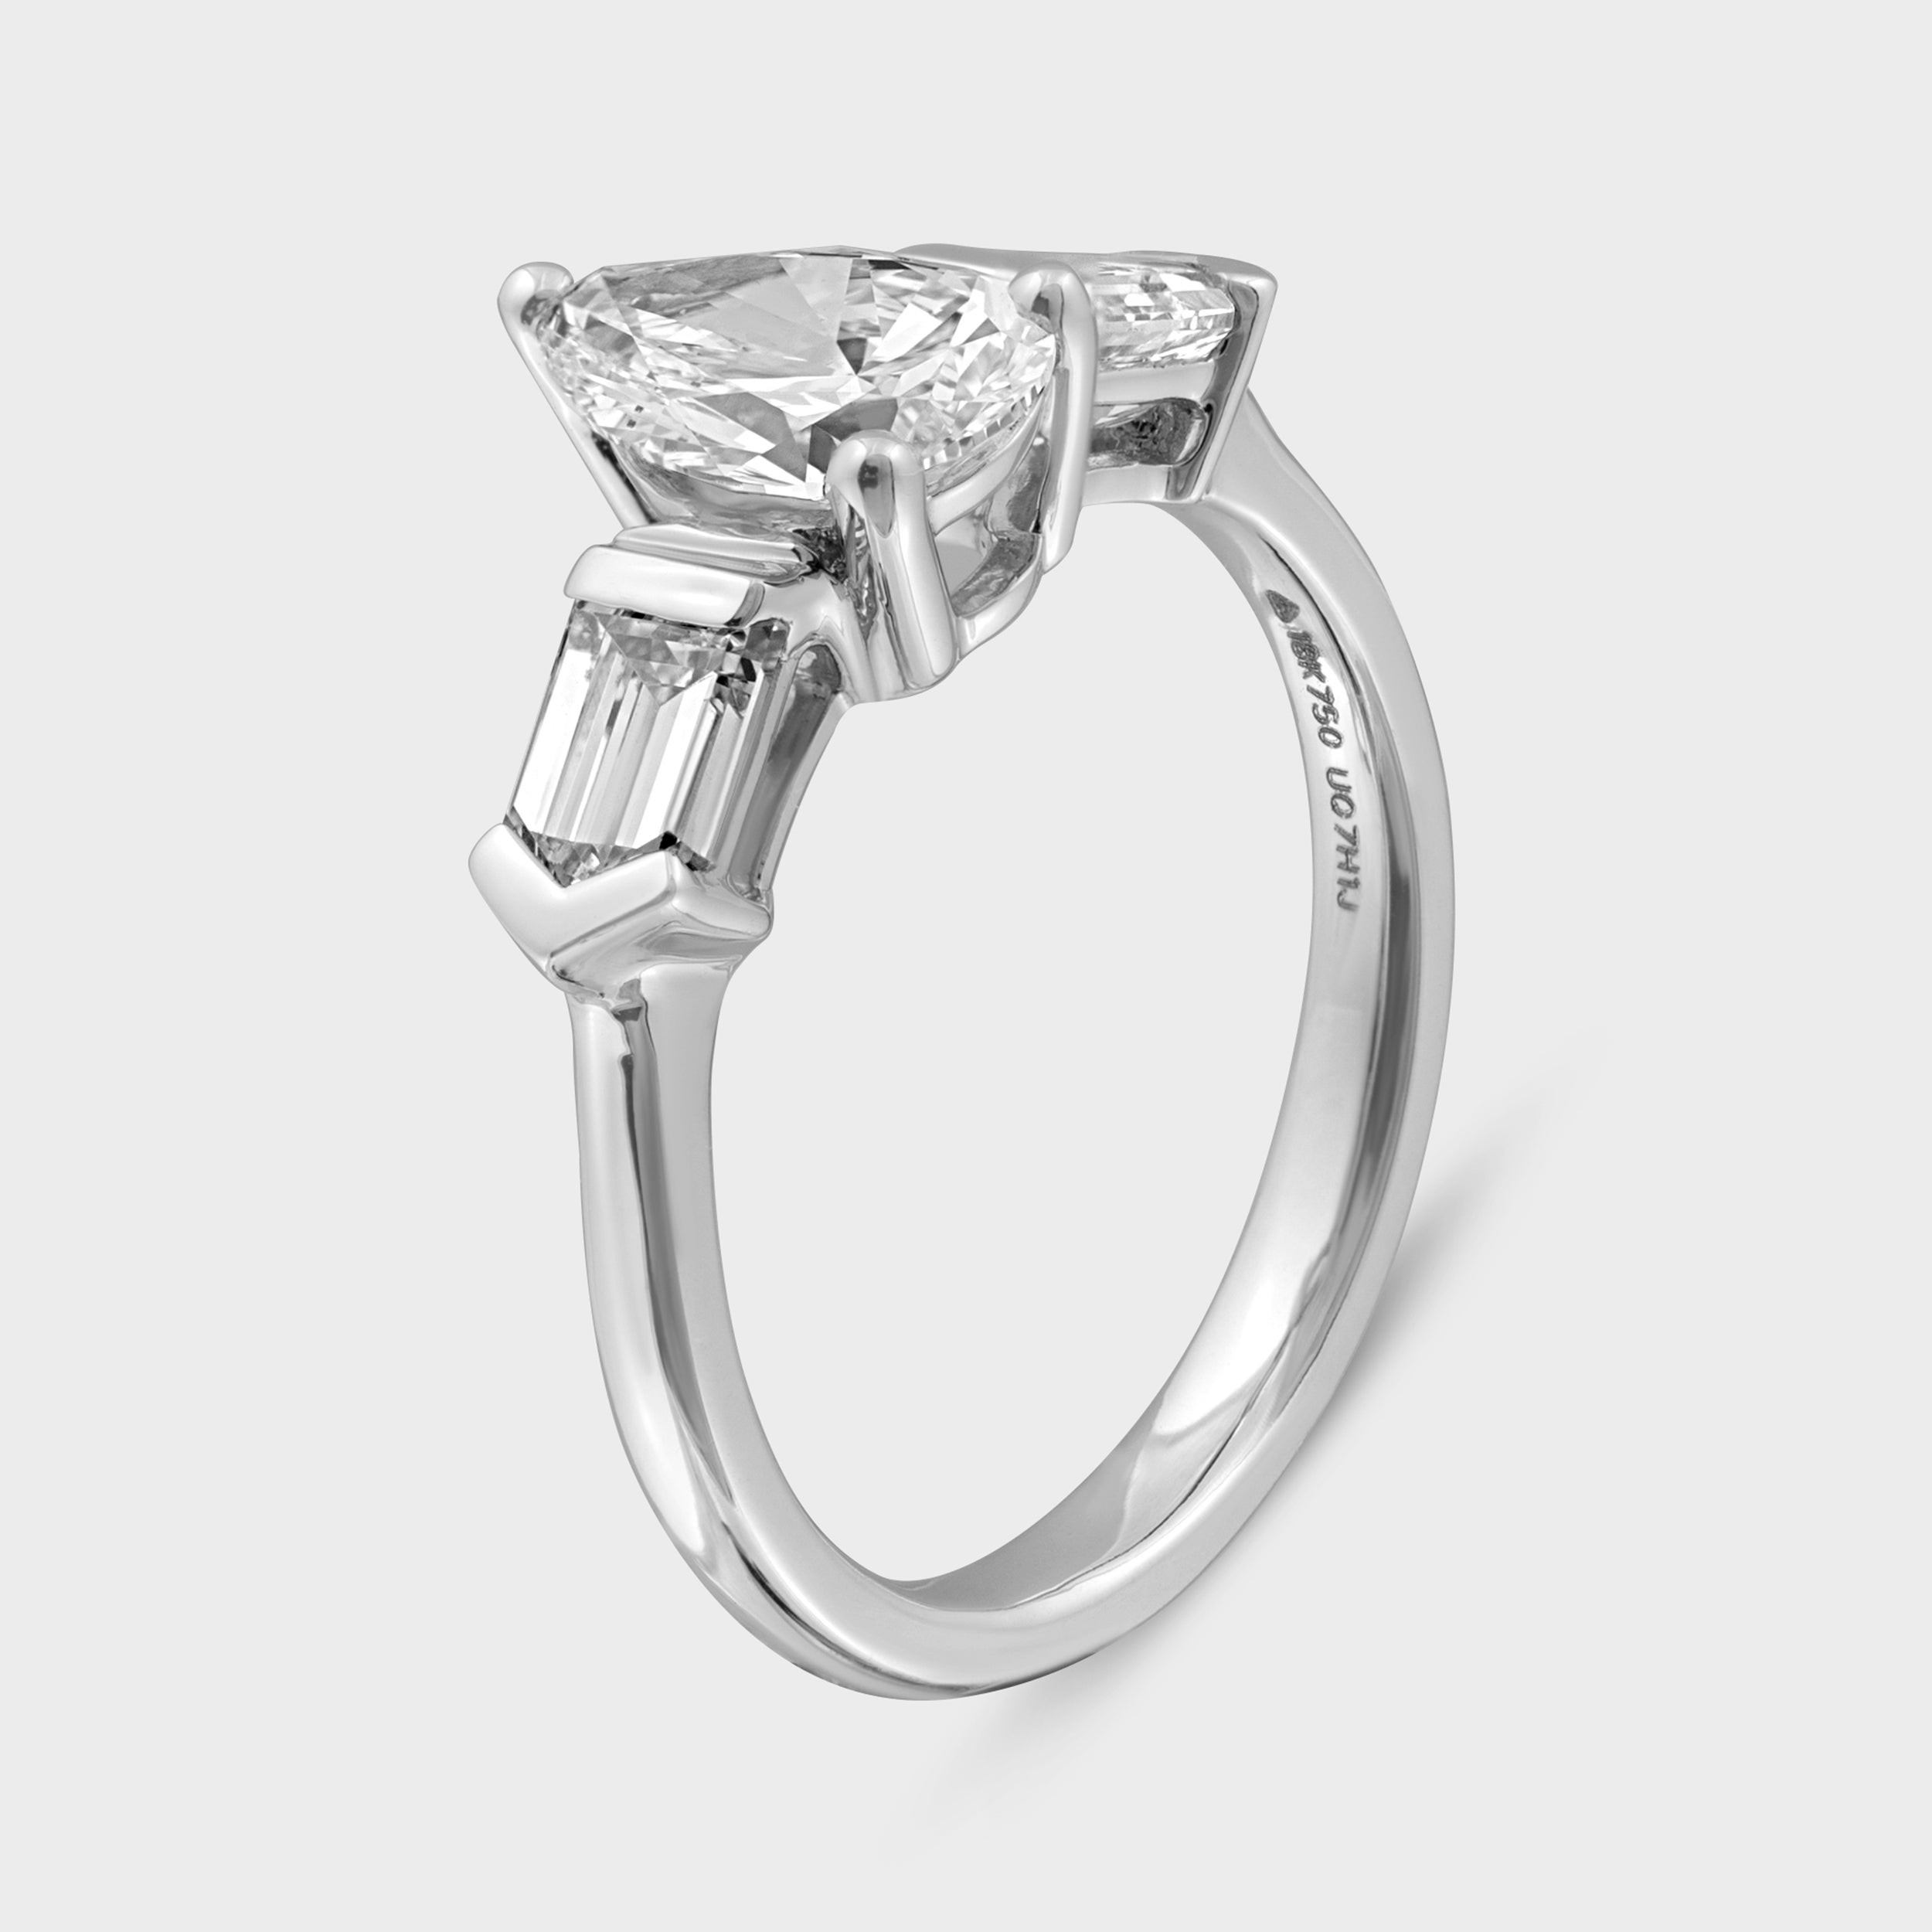 Elegance Personified: Lab Grown Solitaire Pear Diamond Ring with Baguette Cut Accents in White Gold | SKU : 0019512297